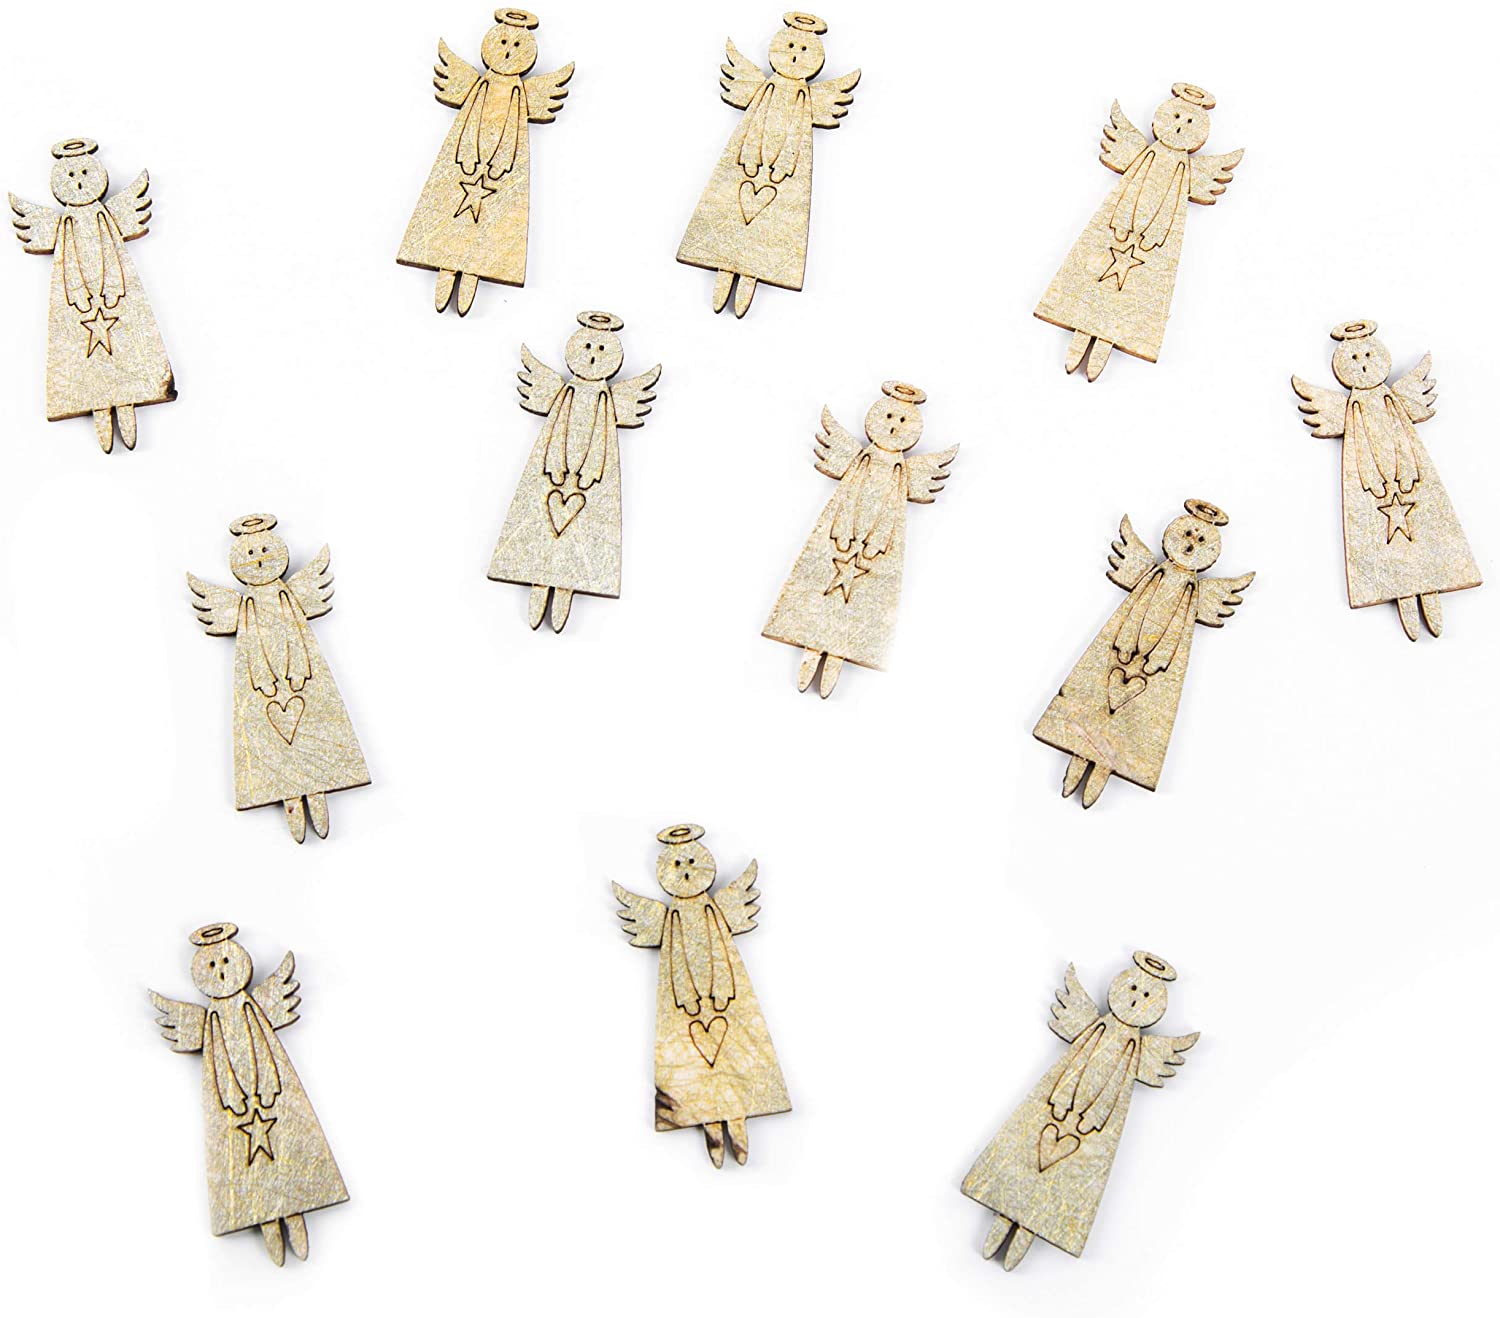 Logbuch-Verlag 12 small mini angels made of wood gold wood angel confetti table decoration Christmas angel scatter pieces decoration Christmas miniature little